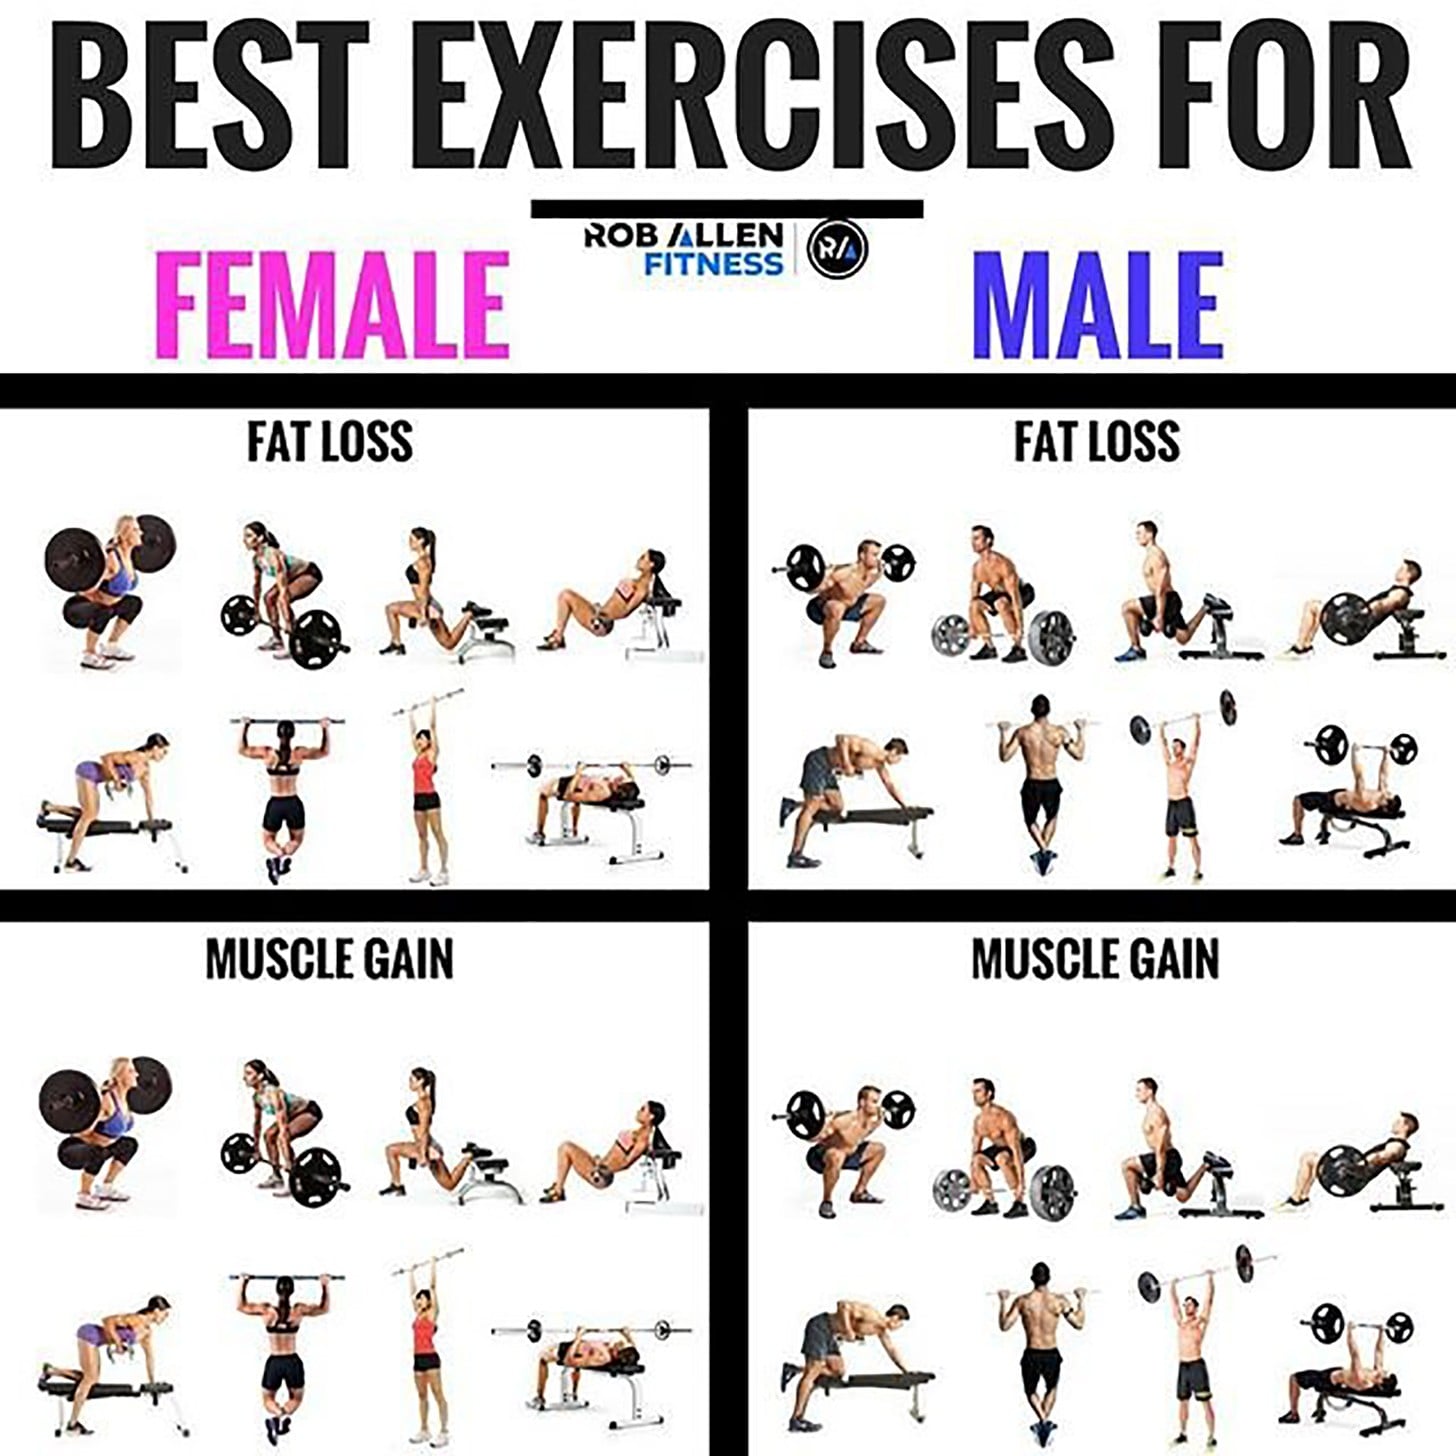 Best Exercises For Fat Loss